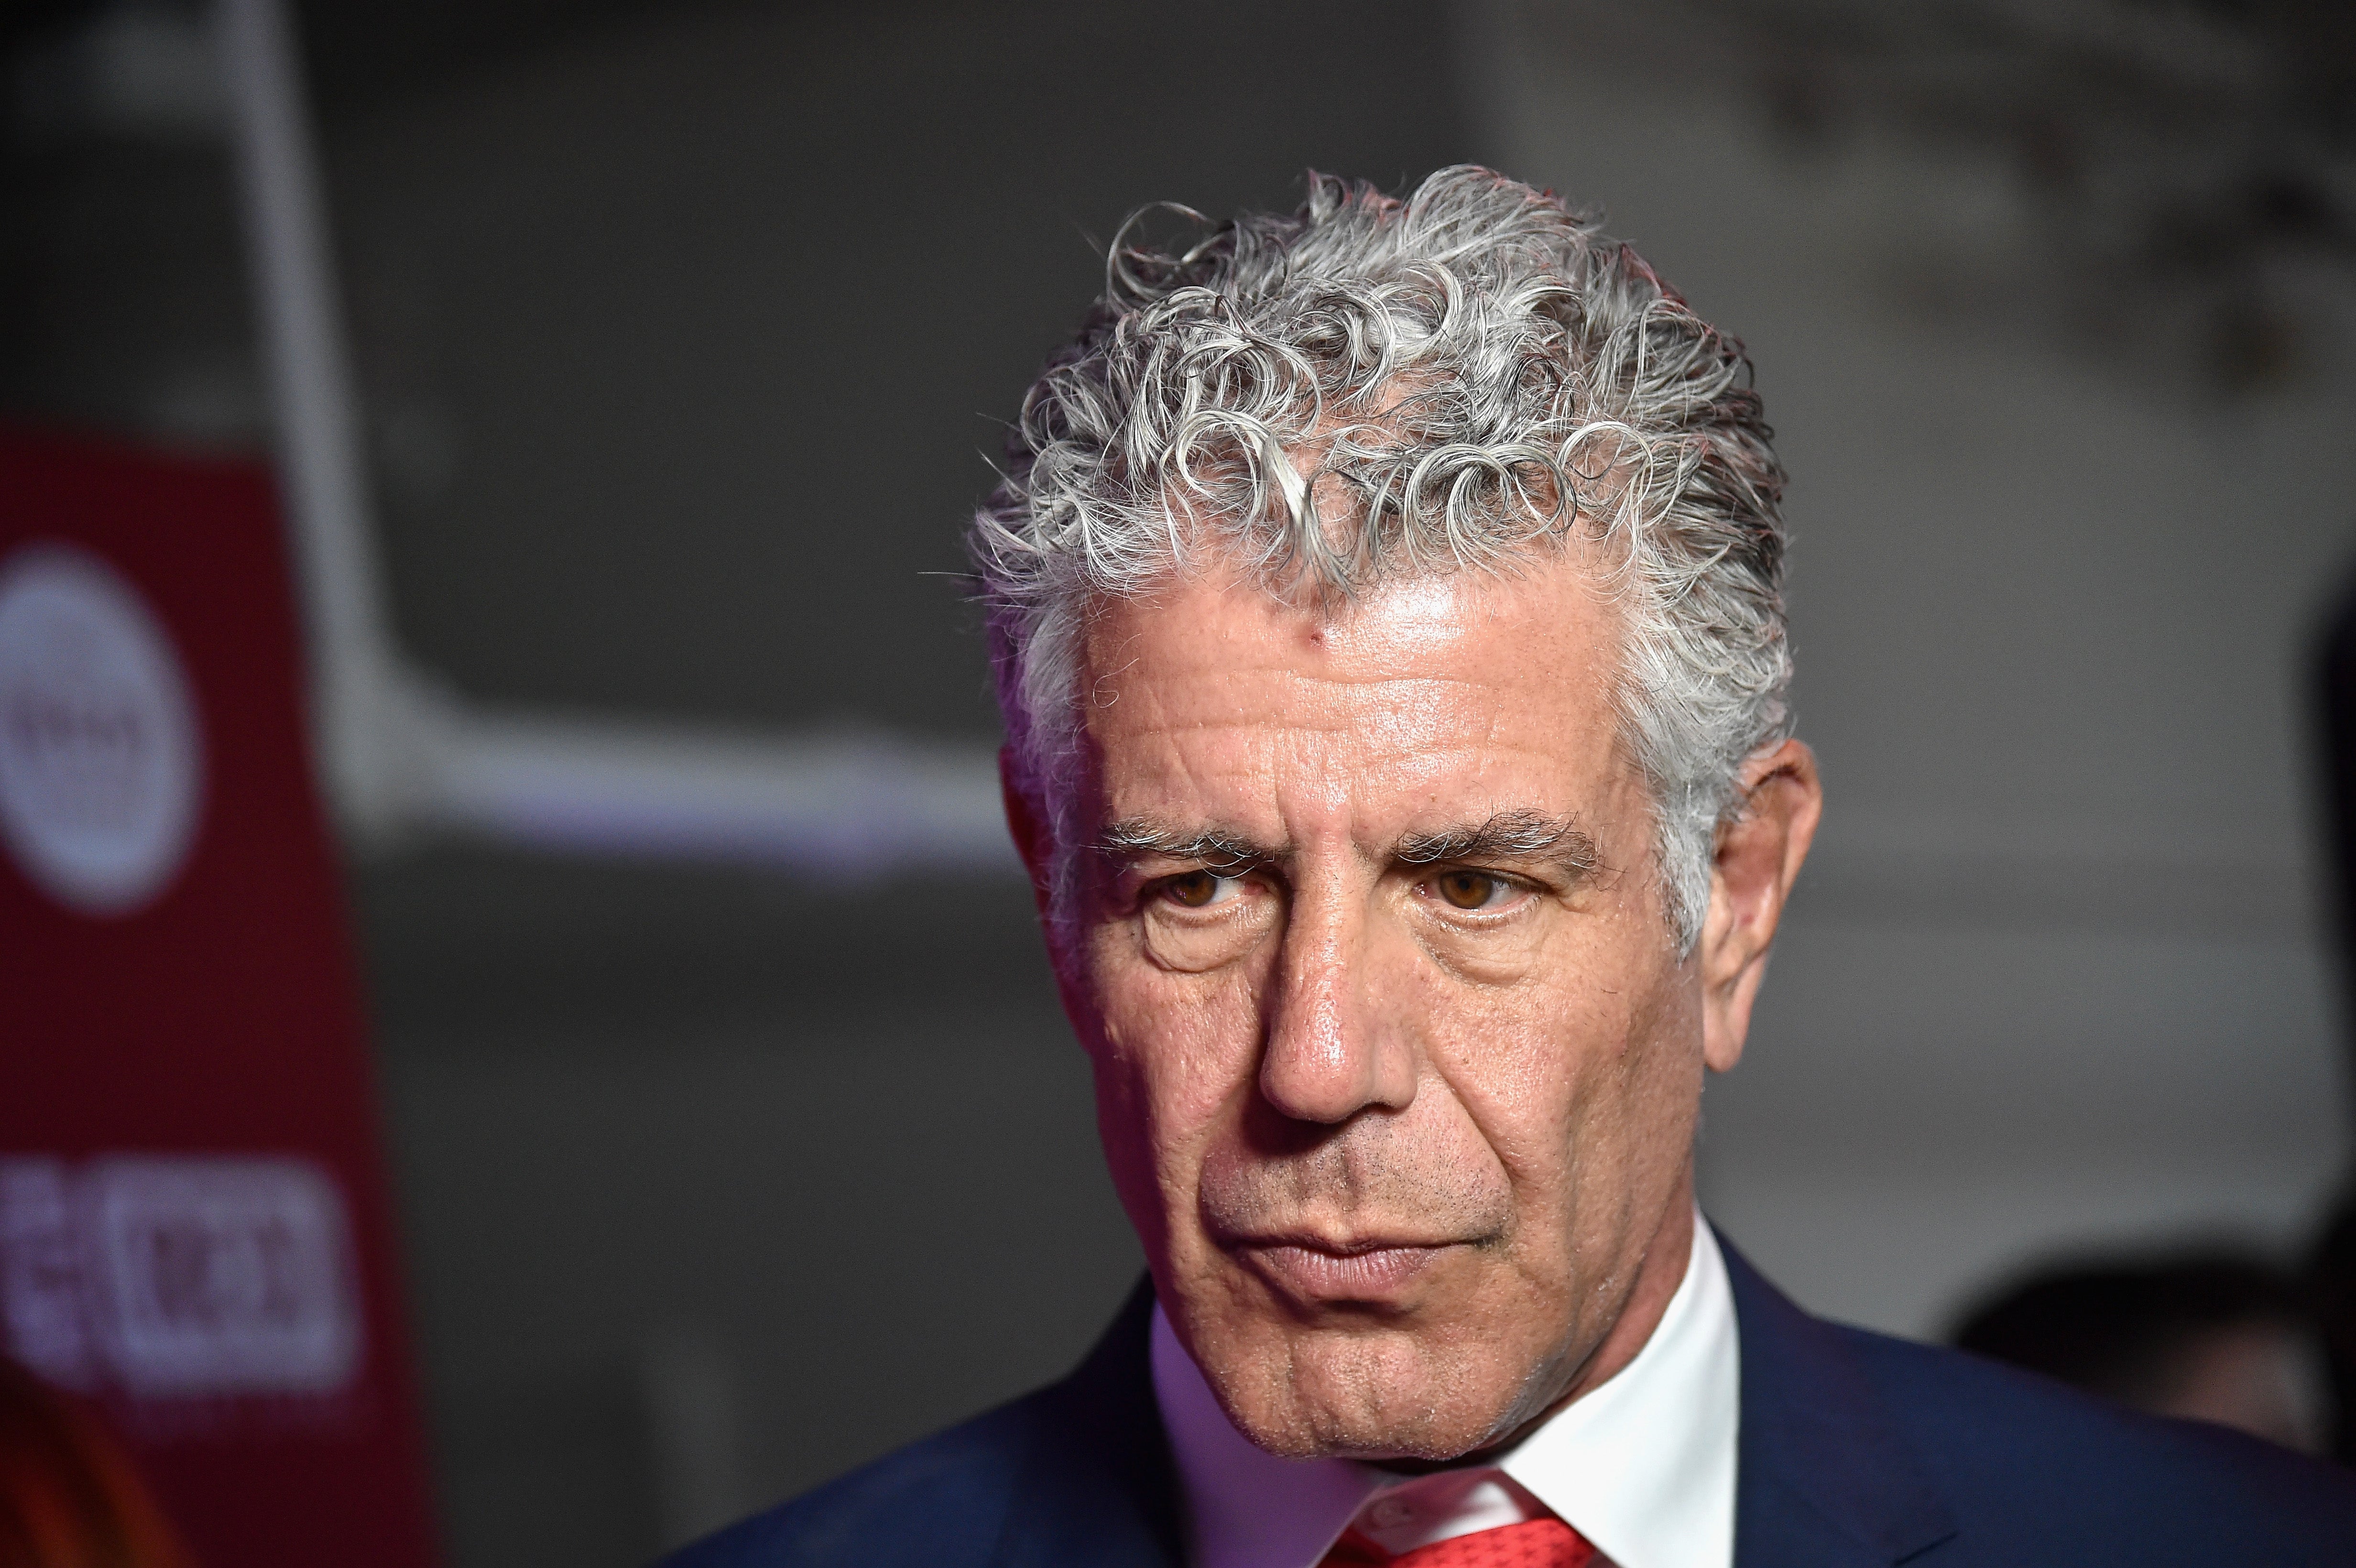 ‘Drink, walk, eat, repeat’ –the book features vintage Bourdain quotes